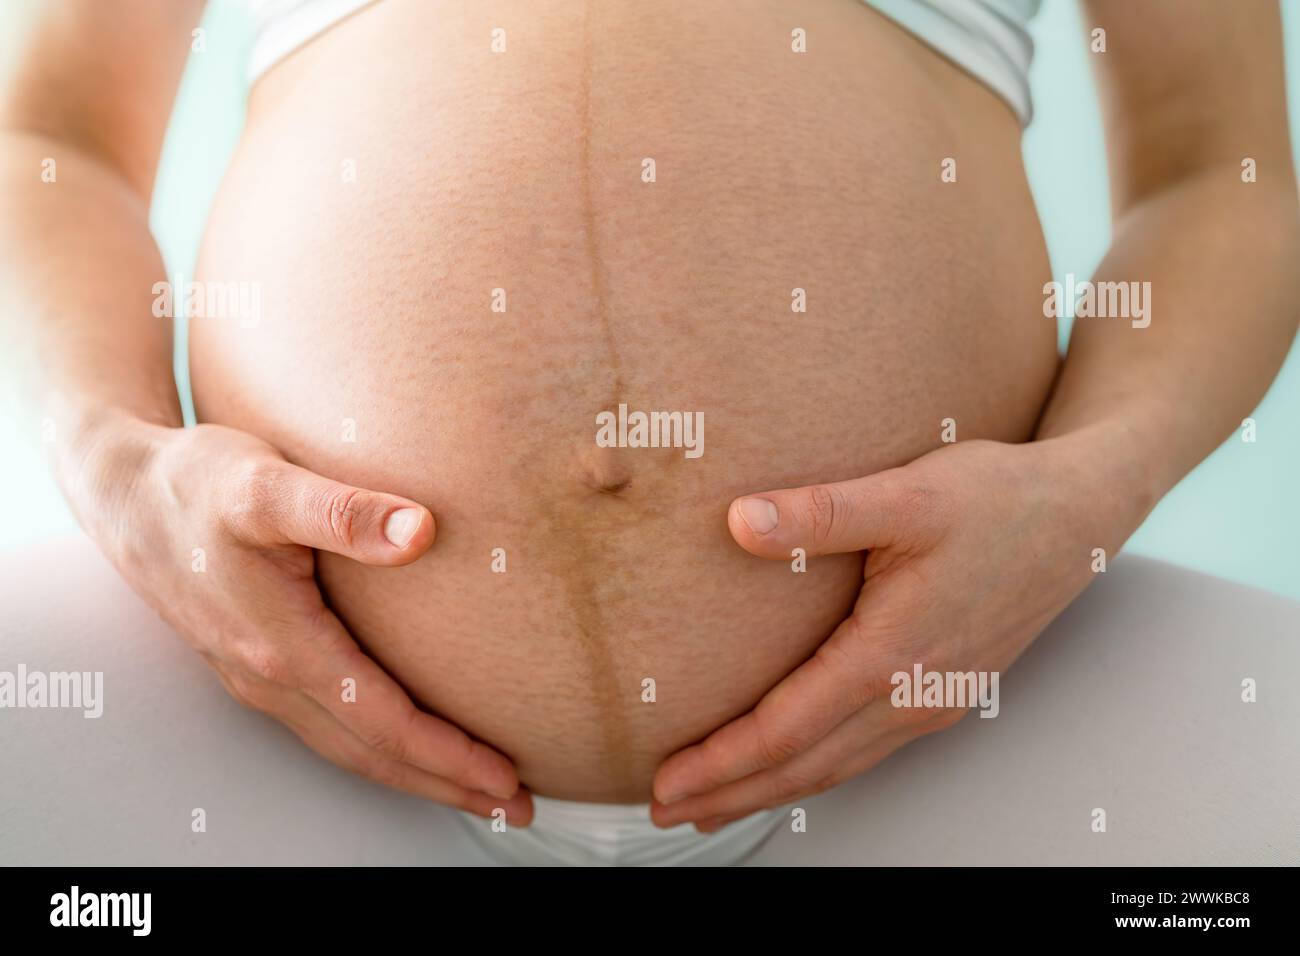 Description: Closeup of mother and gently holding her very round pregnant baby bump. Front view. Turquoise background. Bright shot. Stock Photo